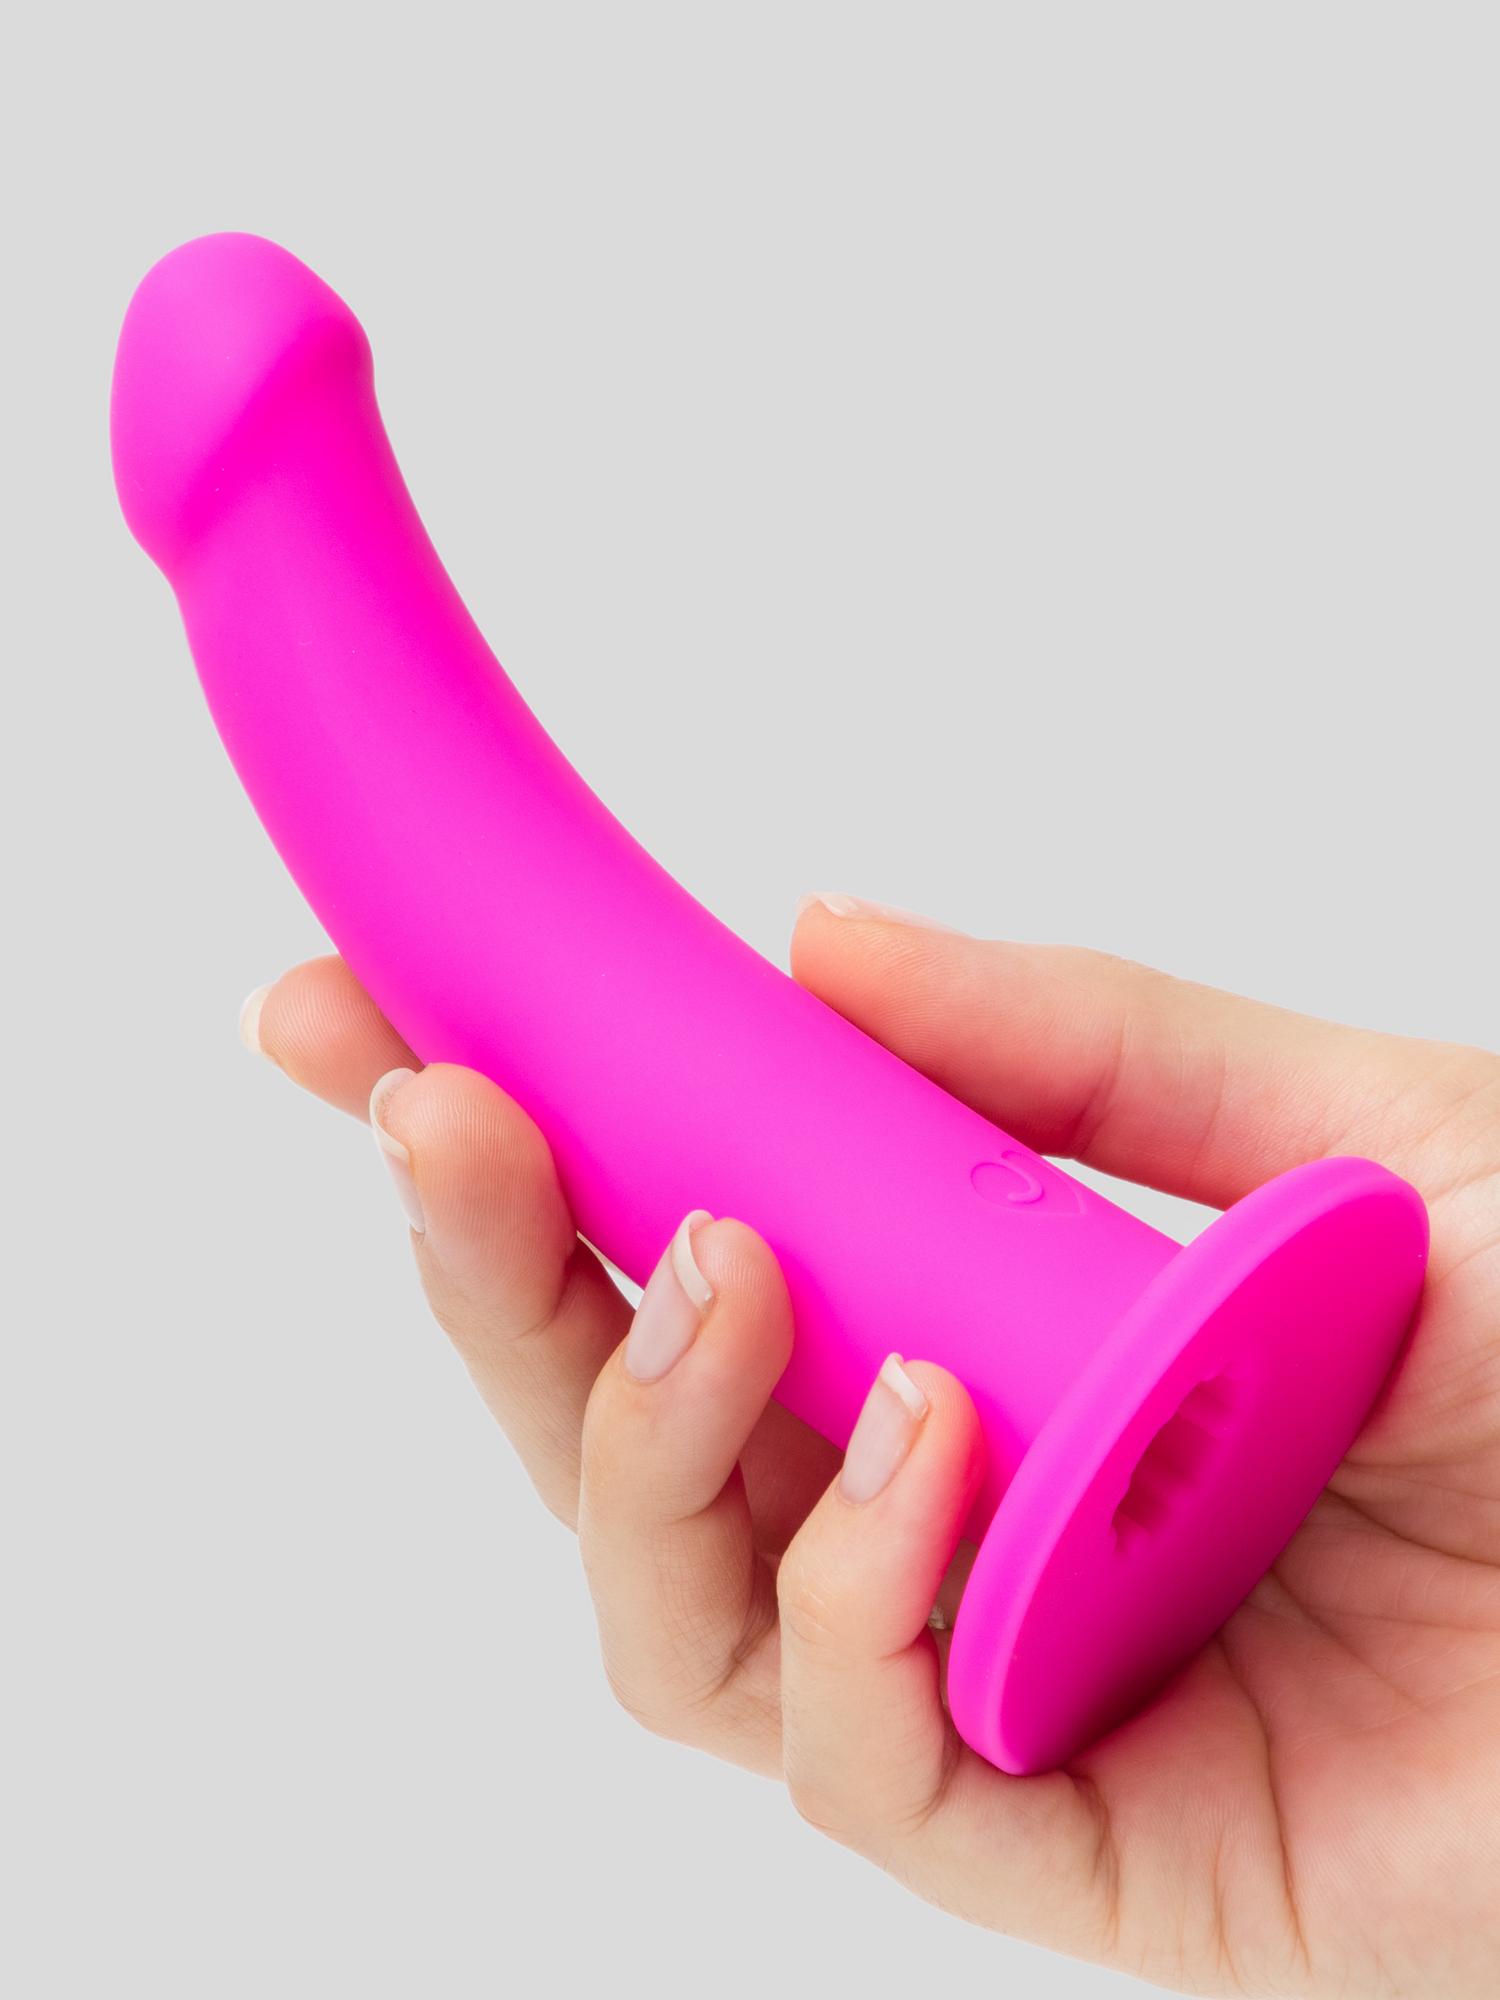 Lovehoney Pink Silicone Suction Cup Dildo. Slide 2